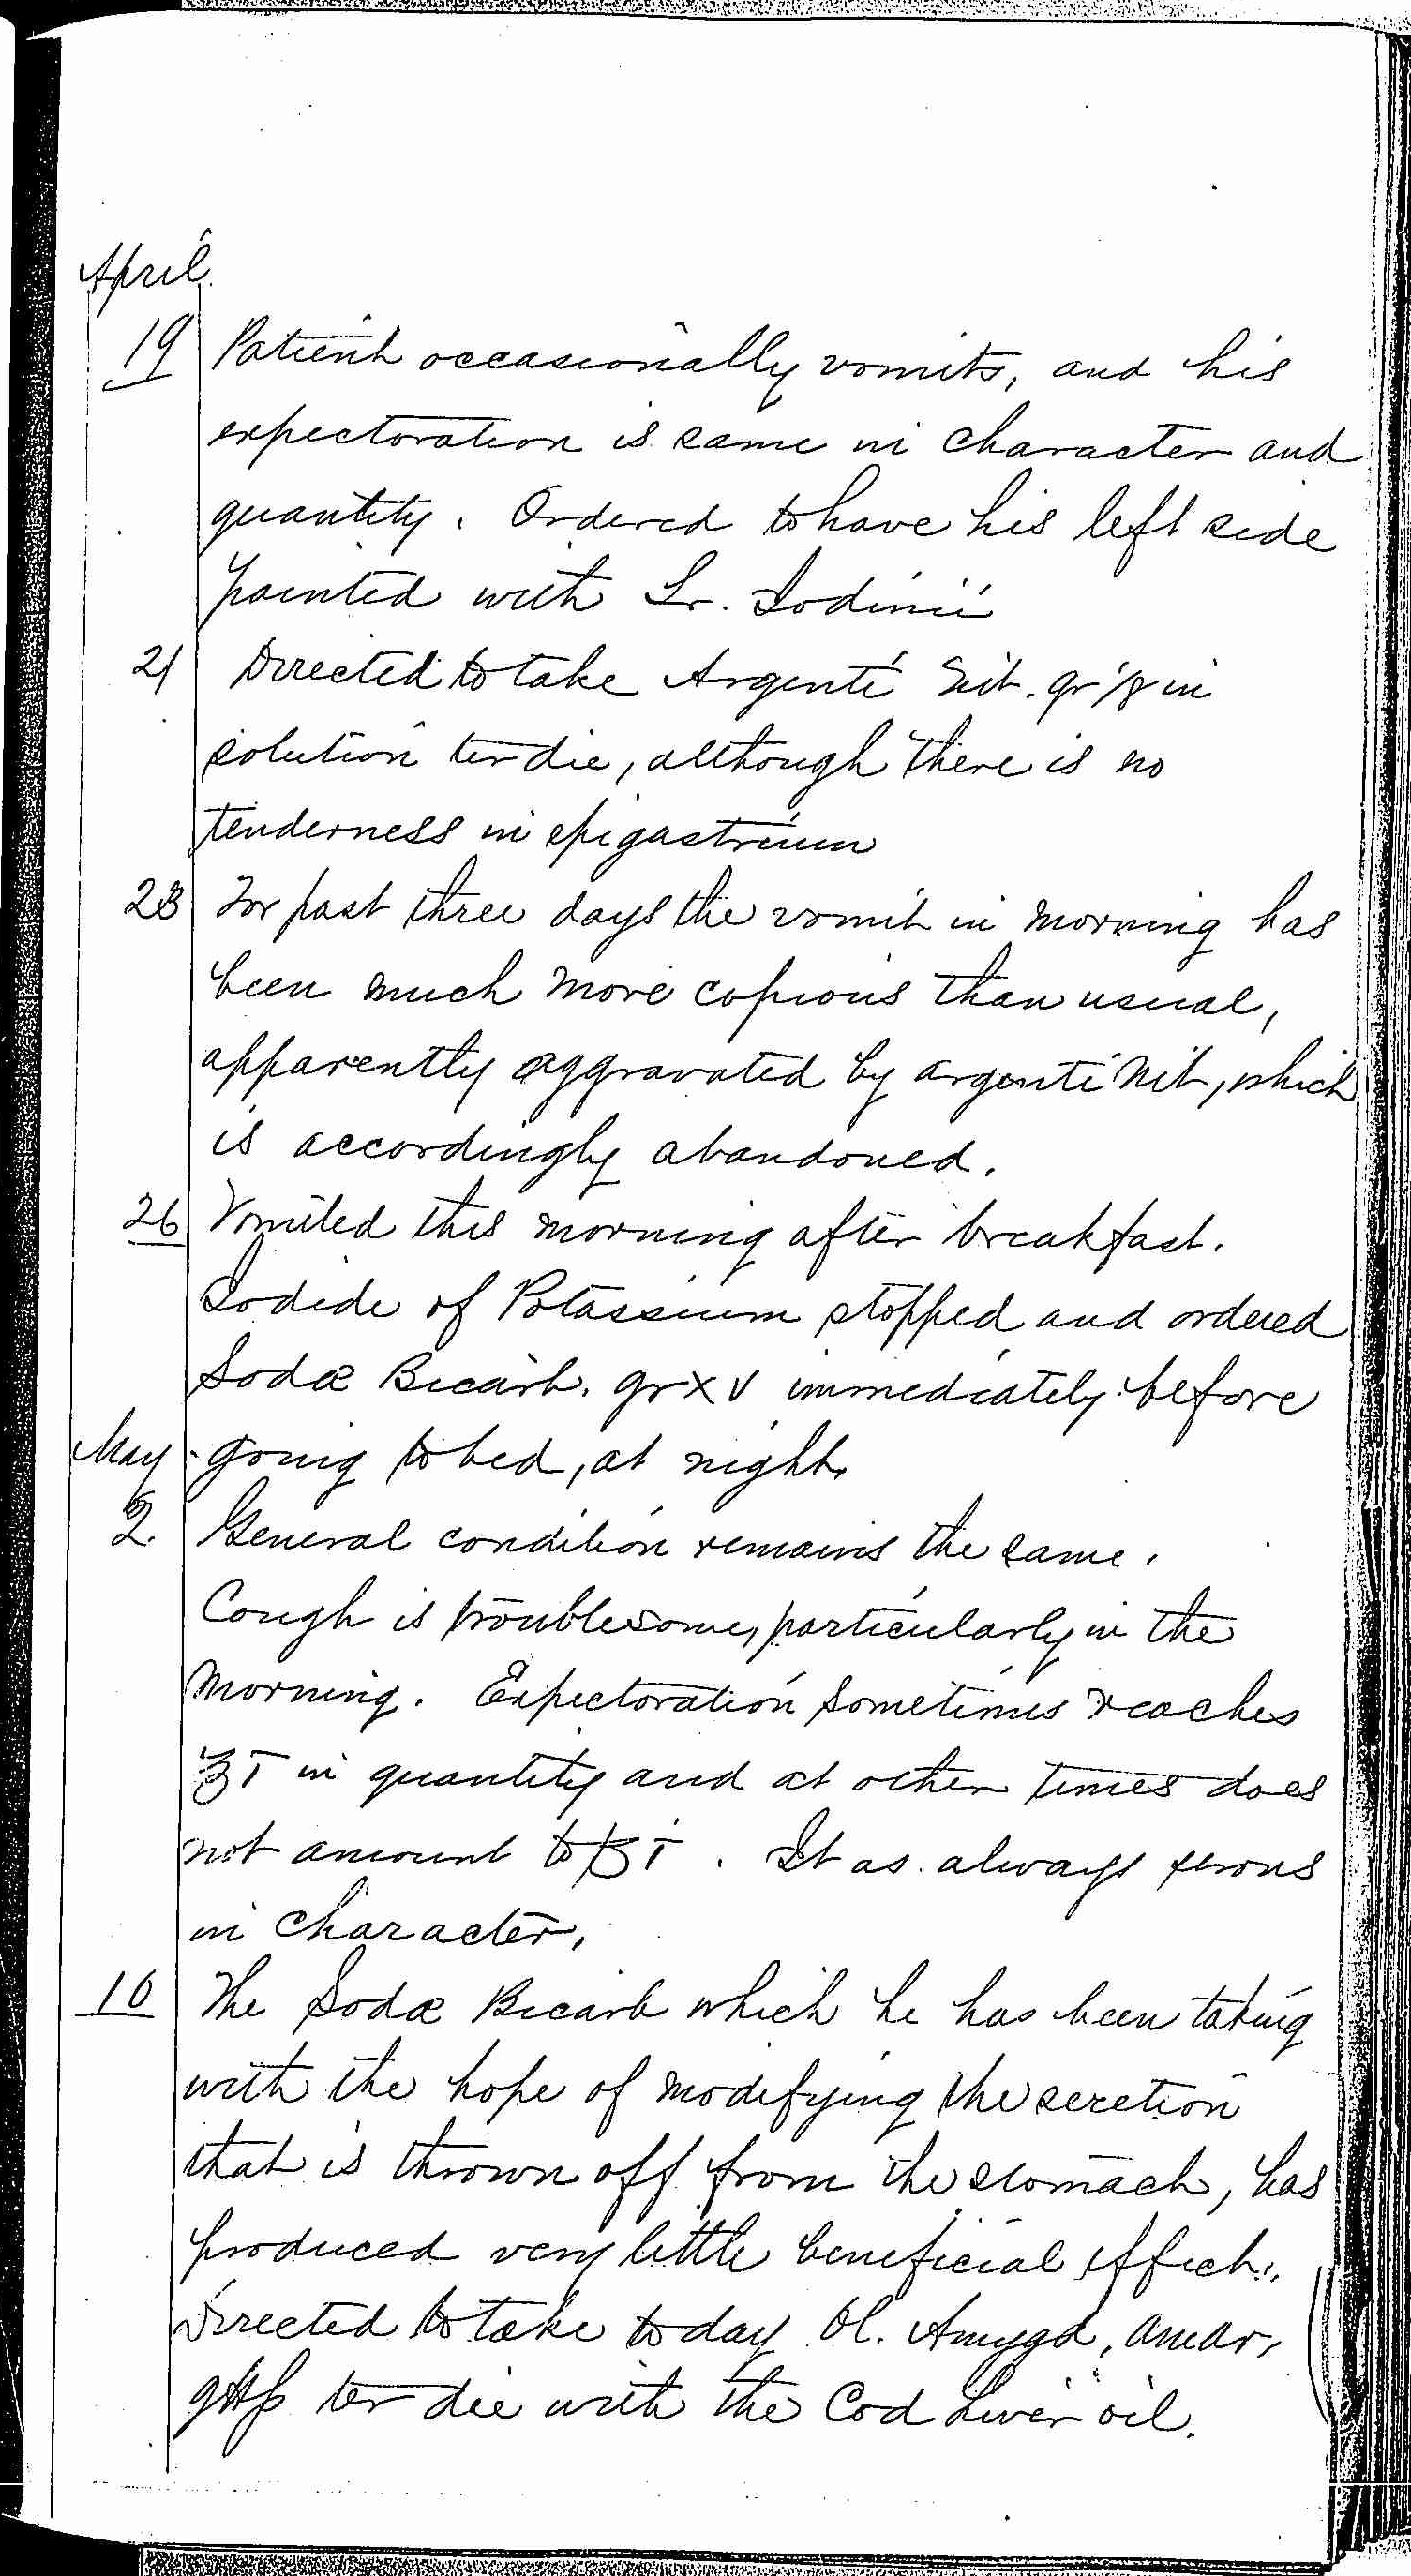 Entry for Hugh Riley (page 27 of 31) in the log Hospital Tickets and Case Papers - Naval Hospital - Washington, D.C. - 1868-69